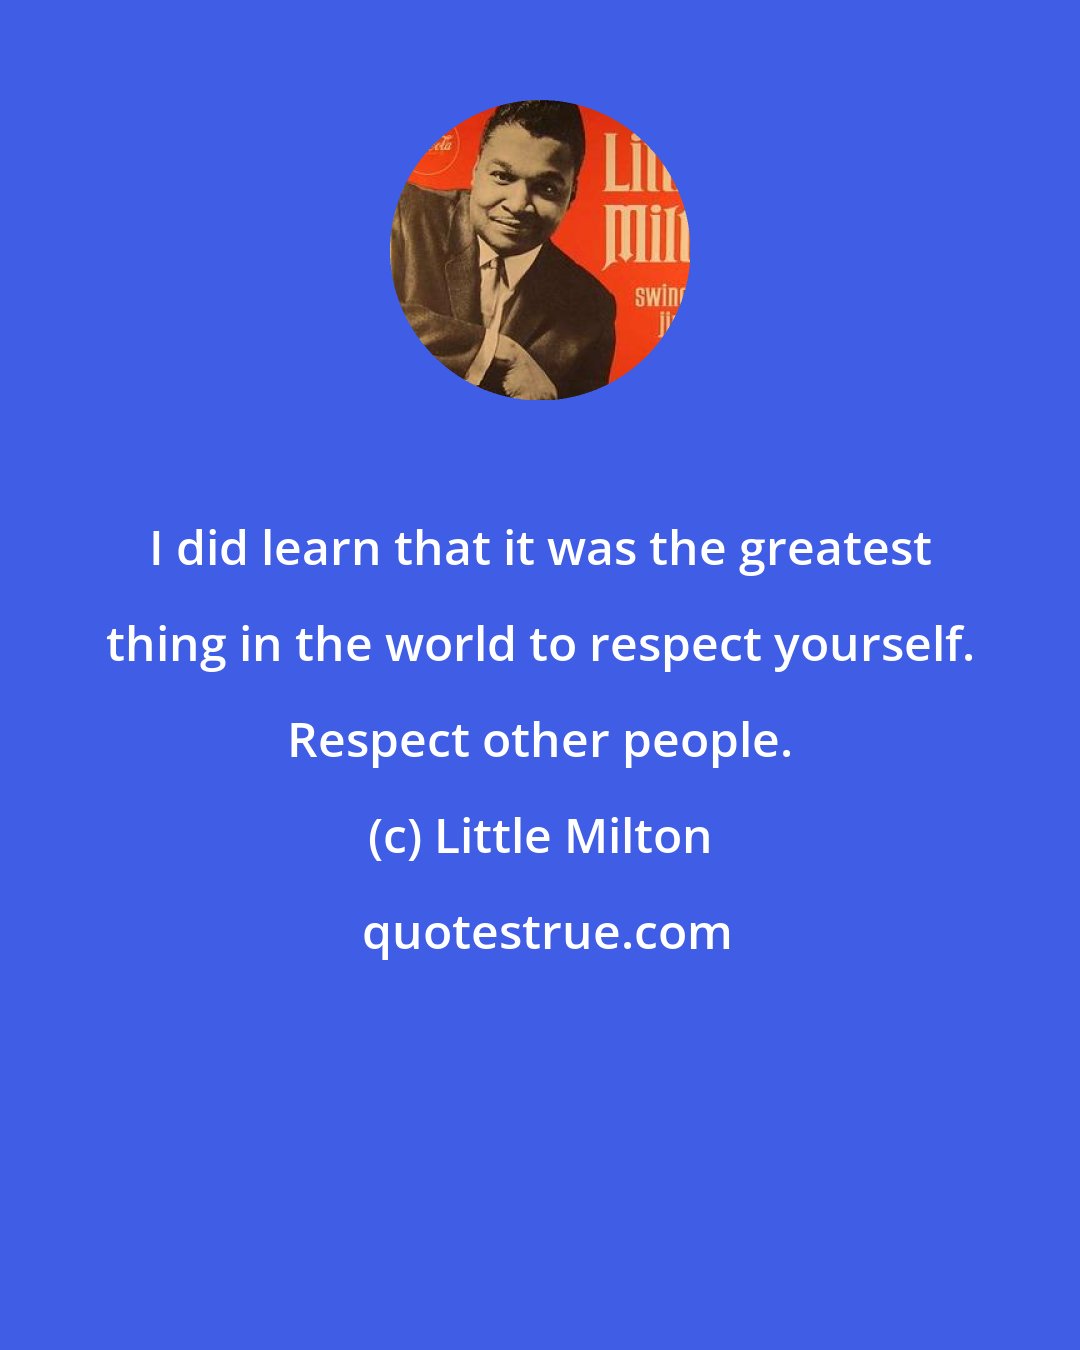 Little Milton: I did learn that it was the greatest thing in the world to respect yourself. Respect other people.